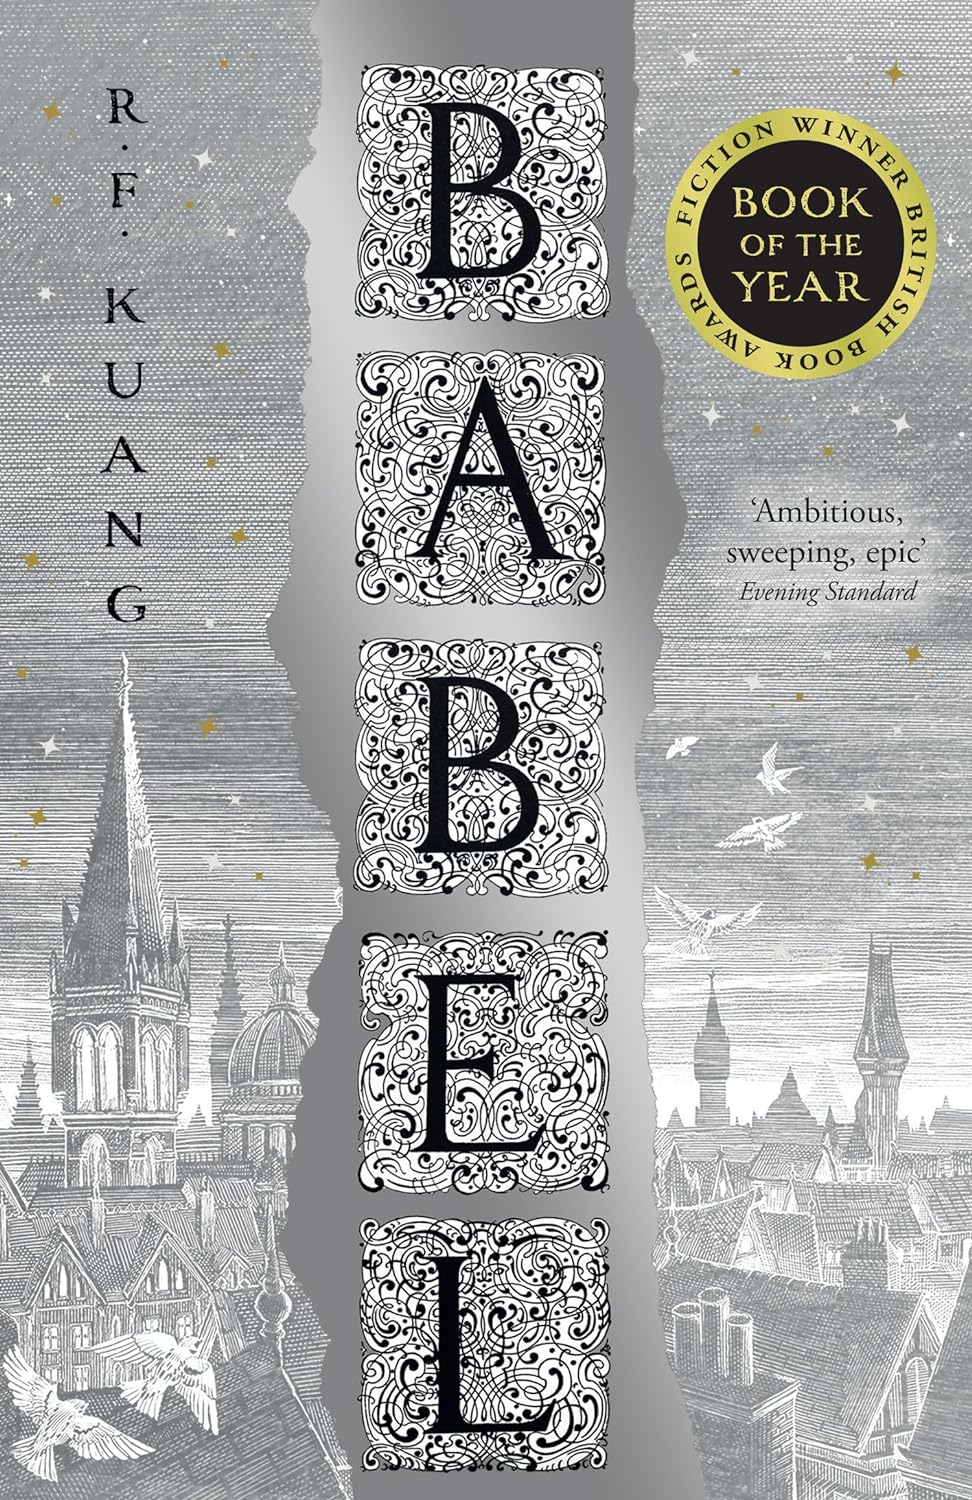 R.F., Kuang Babel - Or the Necessity of Violence: An Arcane History of the Oxford Translators Revolution PB 